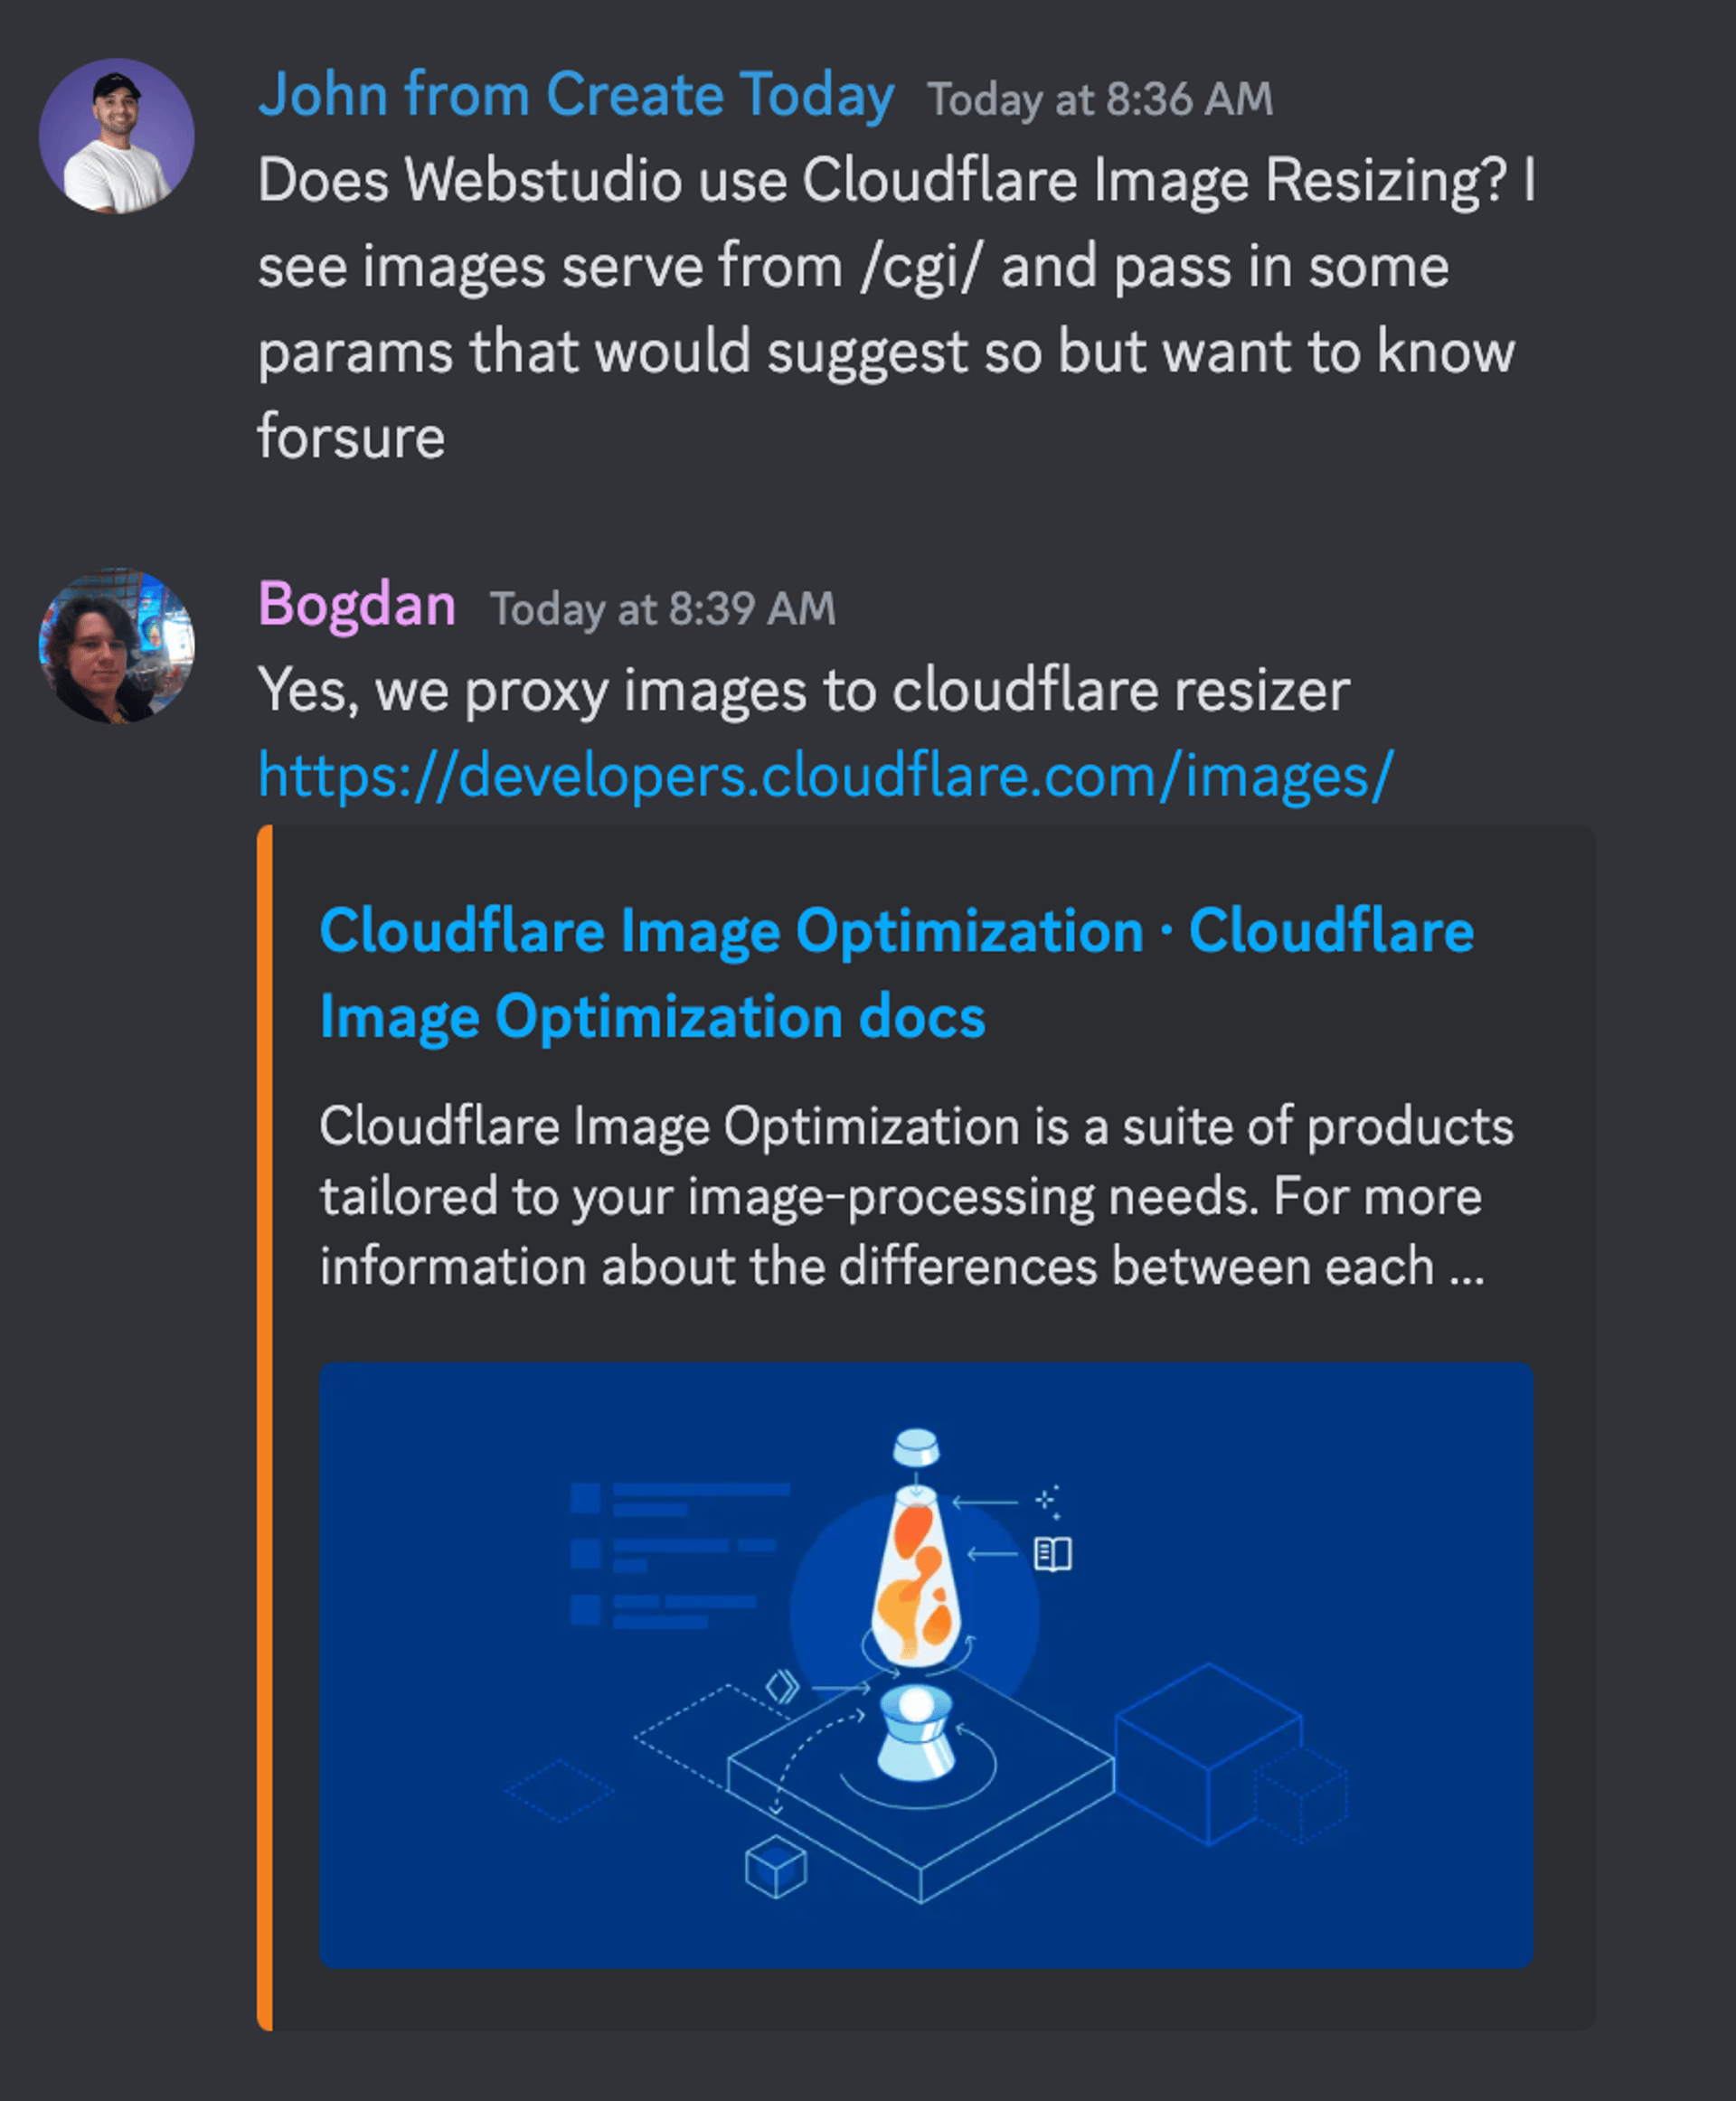 My Discord chat with the Webstudio Dev